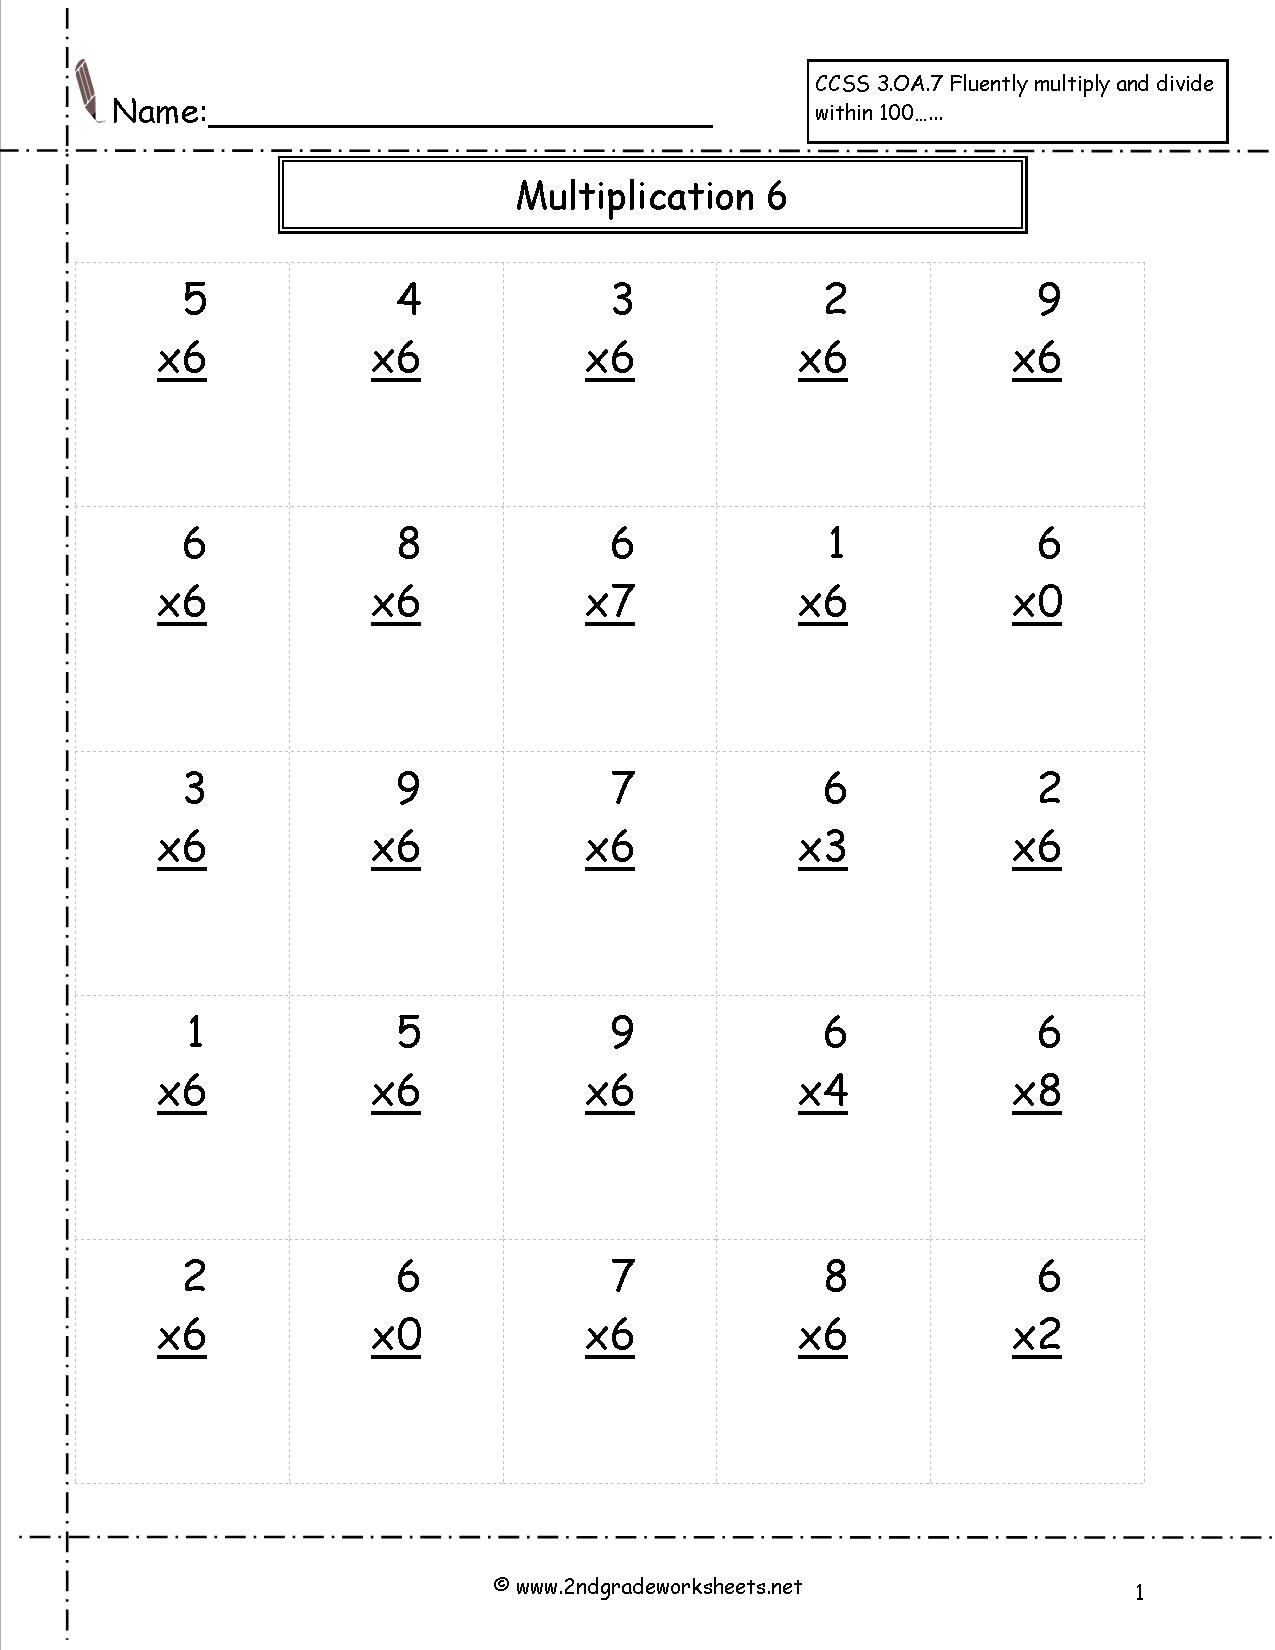 Multiplication Worksheets And Printouts with regard to Worksheets Multiplication 6